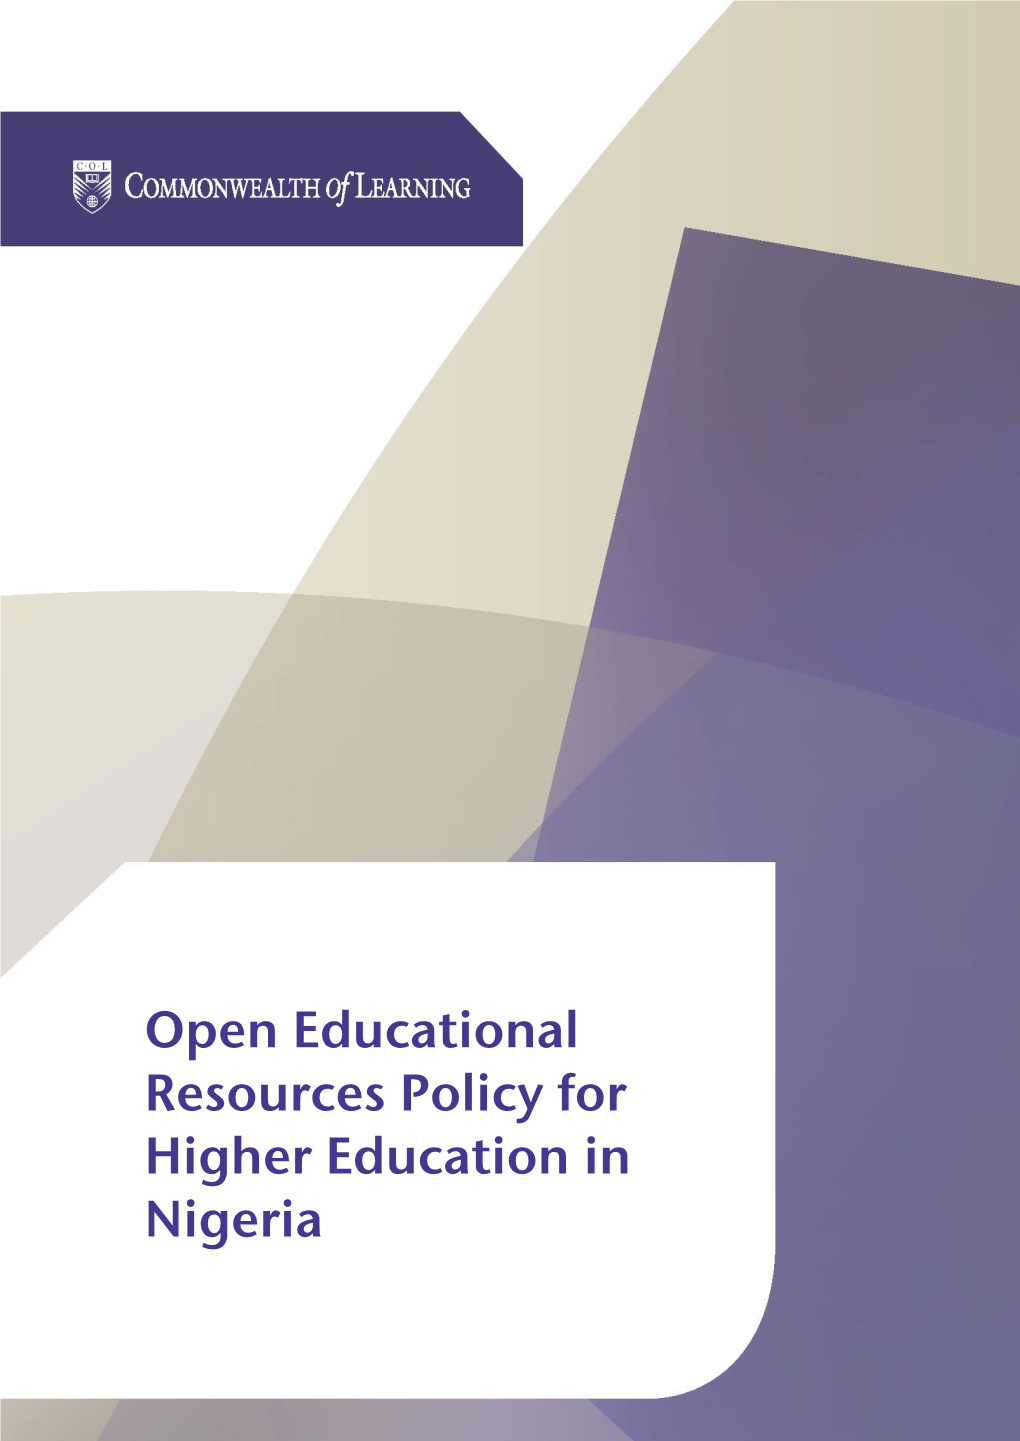 OER Policy for Higher Education in Nigeria